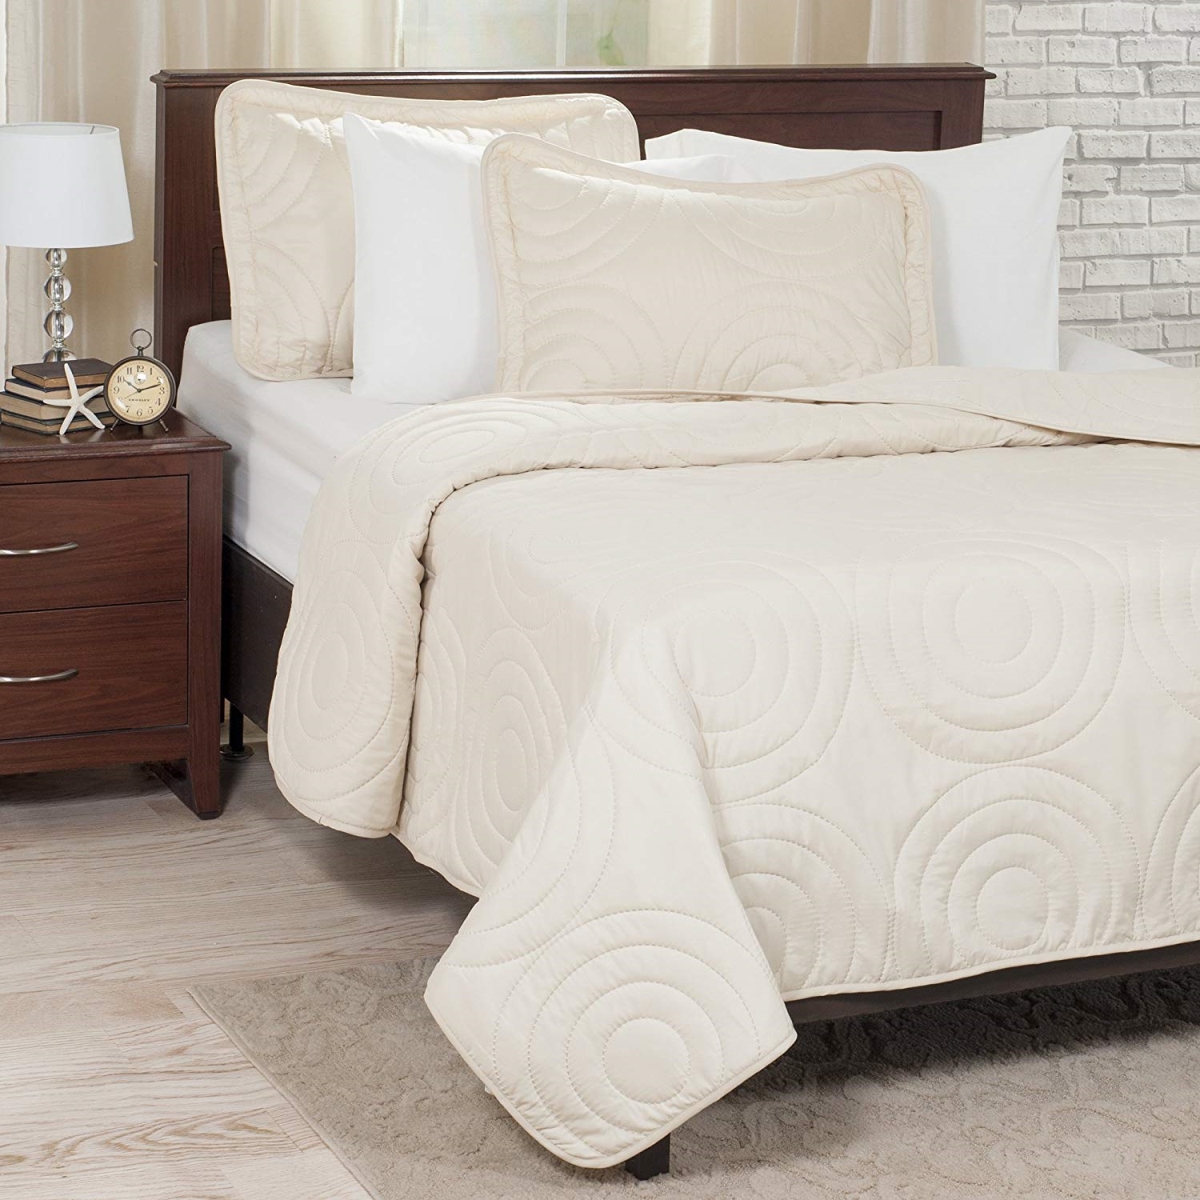 66a-01974 Solid Embossed 3 Piece Quilt Set, King Size - Ivory